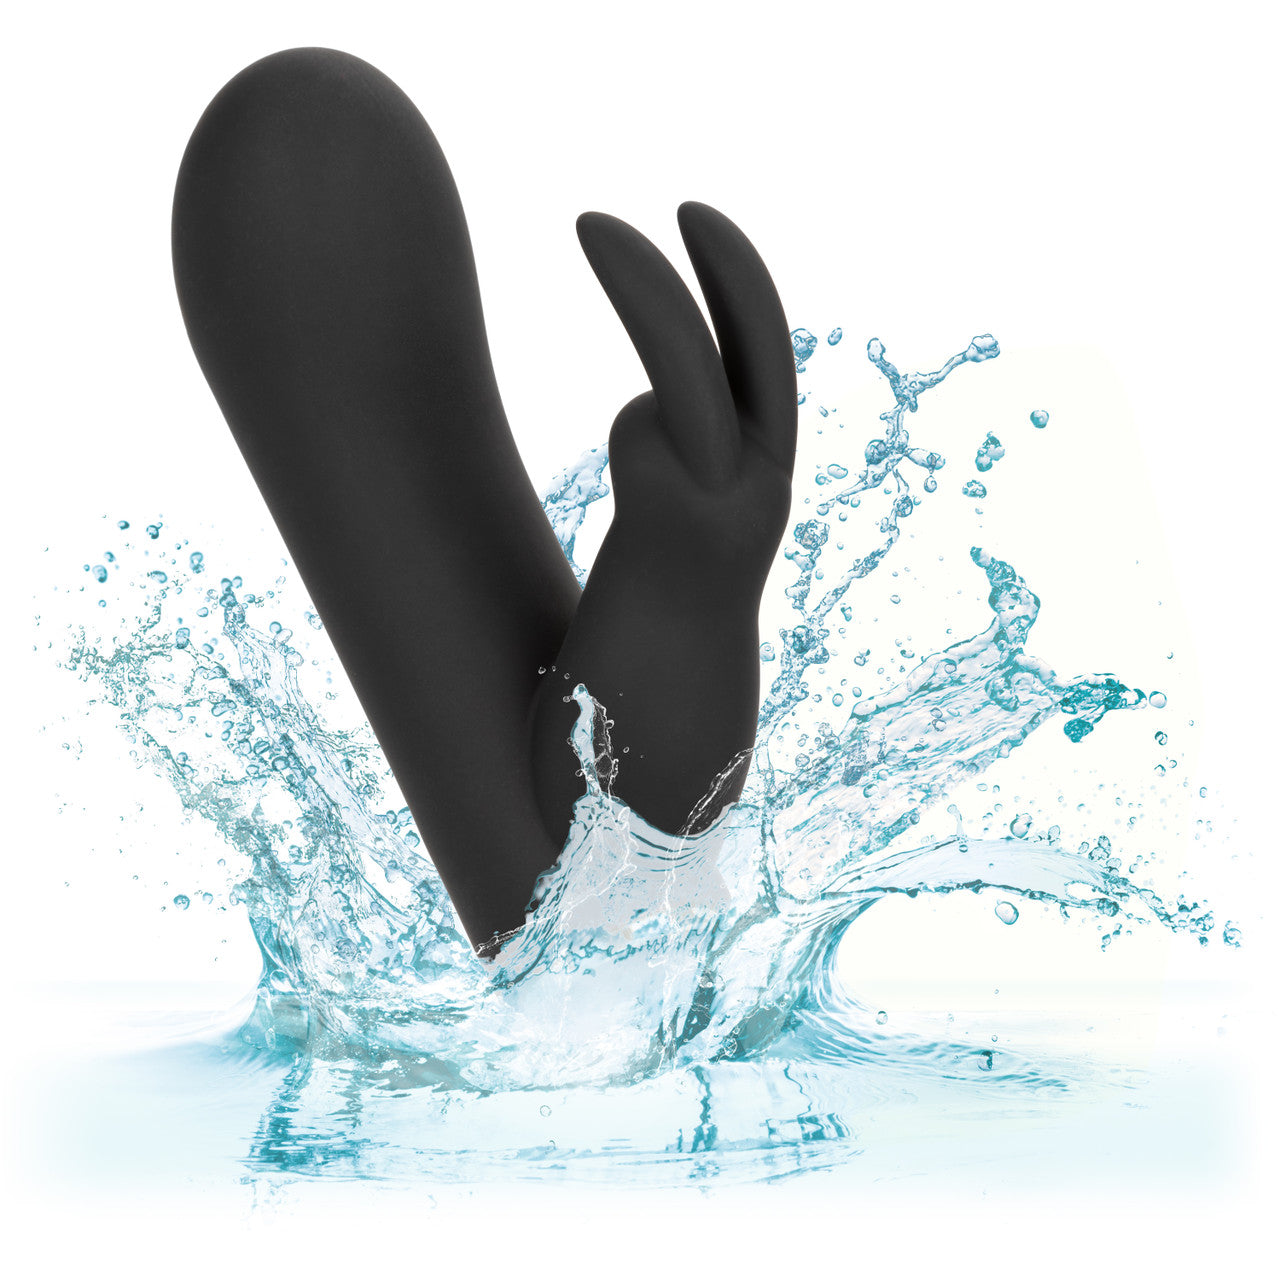 Raven Bunny Mini Dual Massager - Thorn & Feather